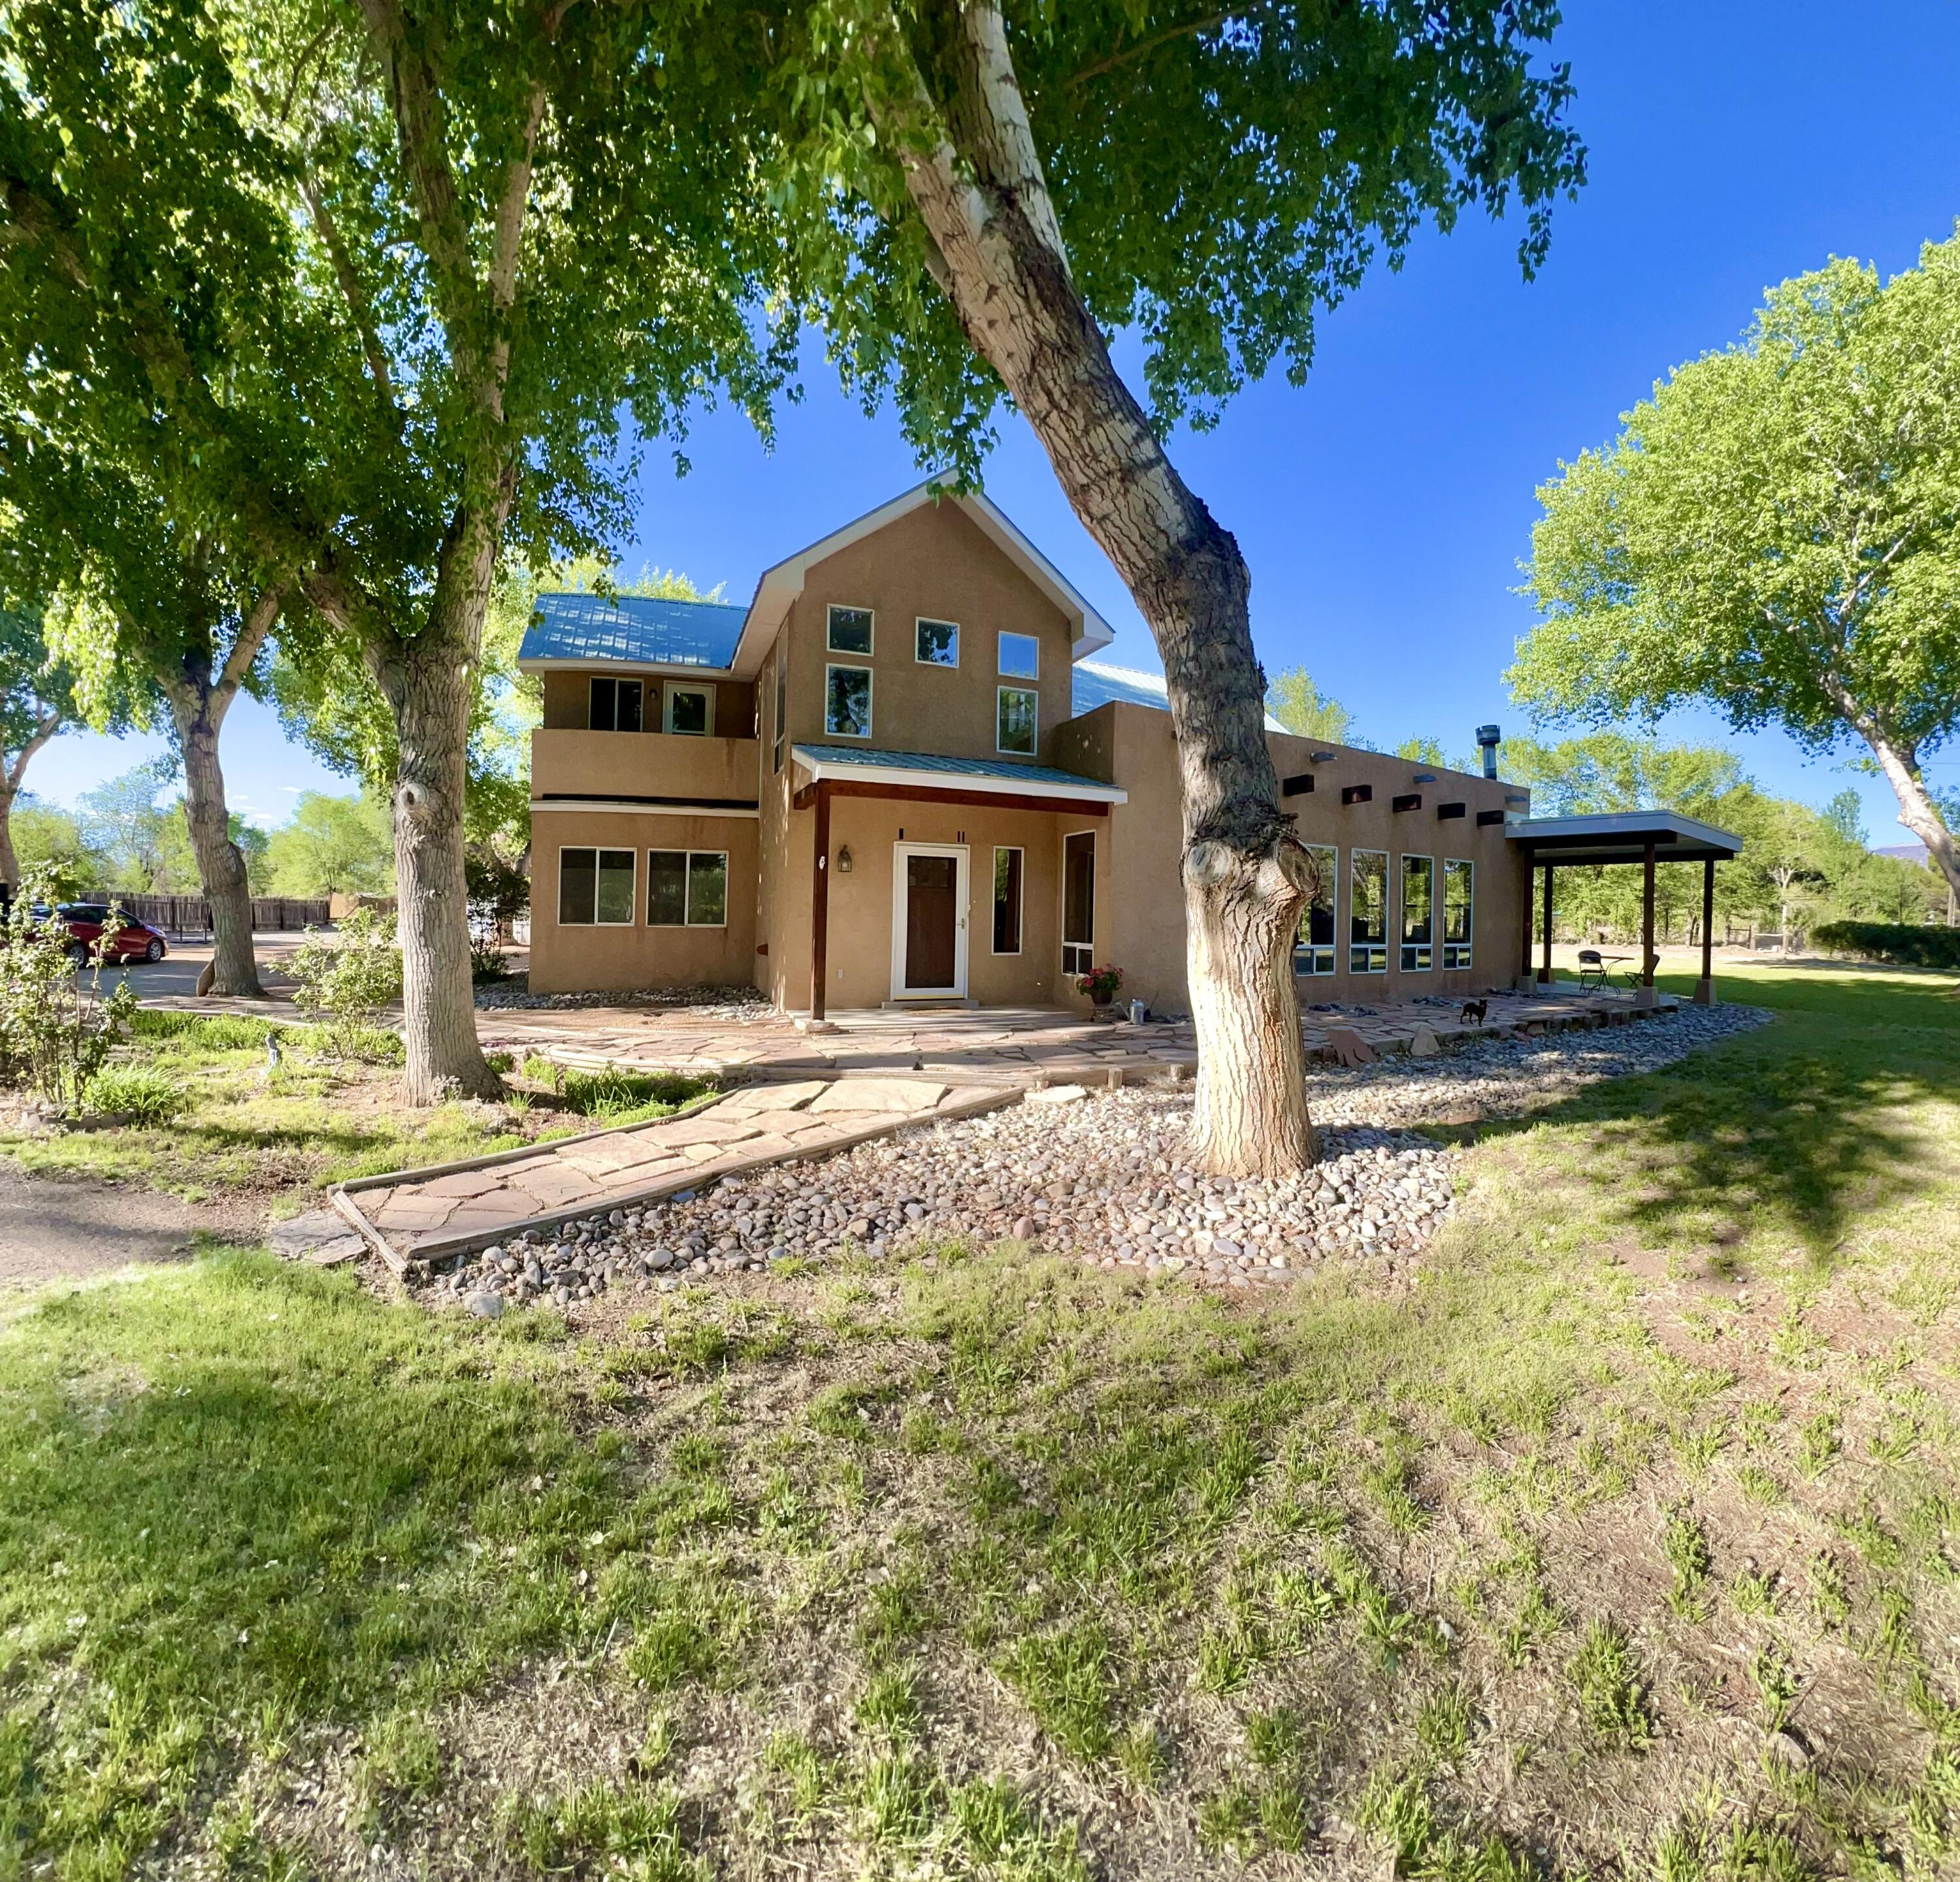 Classic Elegance Northern New Mexican Home in a gorgeous Corrales location, amidst the Cottonwood tree-lined ''green belt''. Welcome in! Spacious lofty beamed ceilings begin at the front foyer. The main floor hosts a luxuriously sizable great room, open kitchen to include granite countertops, island cafe, dining area,  a large bedroom / office, full bathroom near by laundry service. Top floor, the two bedrooms boast  private balconies with views & 2 full baths. Throughout the home: well appointed passive solar windows provide natural opulent lighting. Refrigerated air, dual heating systems CFA & radiant floor heat will optimize your comfort all four seasons. Outside East facing, truly phenomenal covered patio with panoramic views of the Sandia Mountains. ONE ACREpre-1907 Irrigation WR*